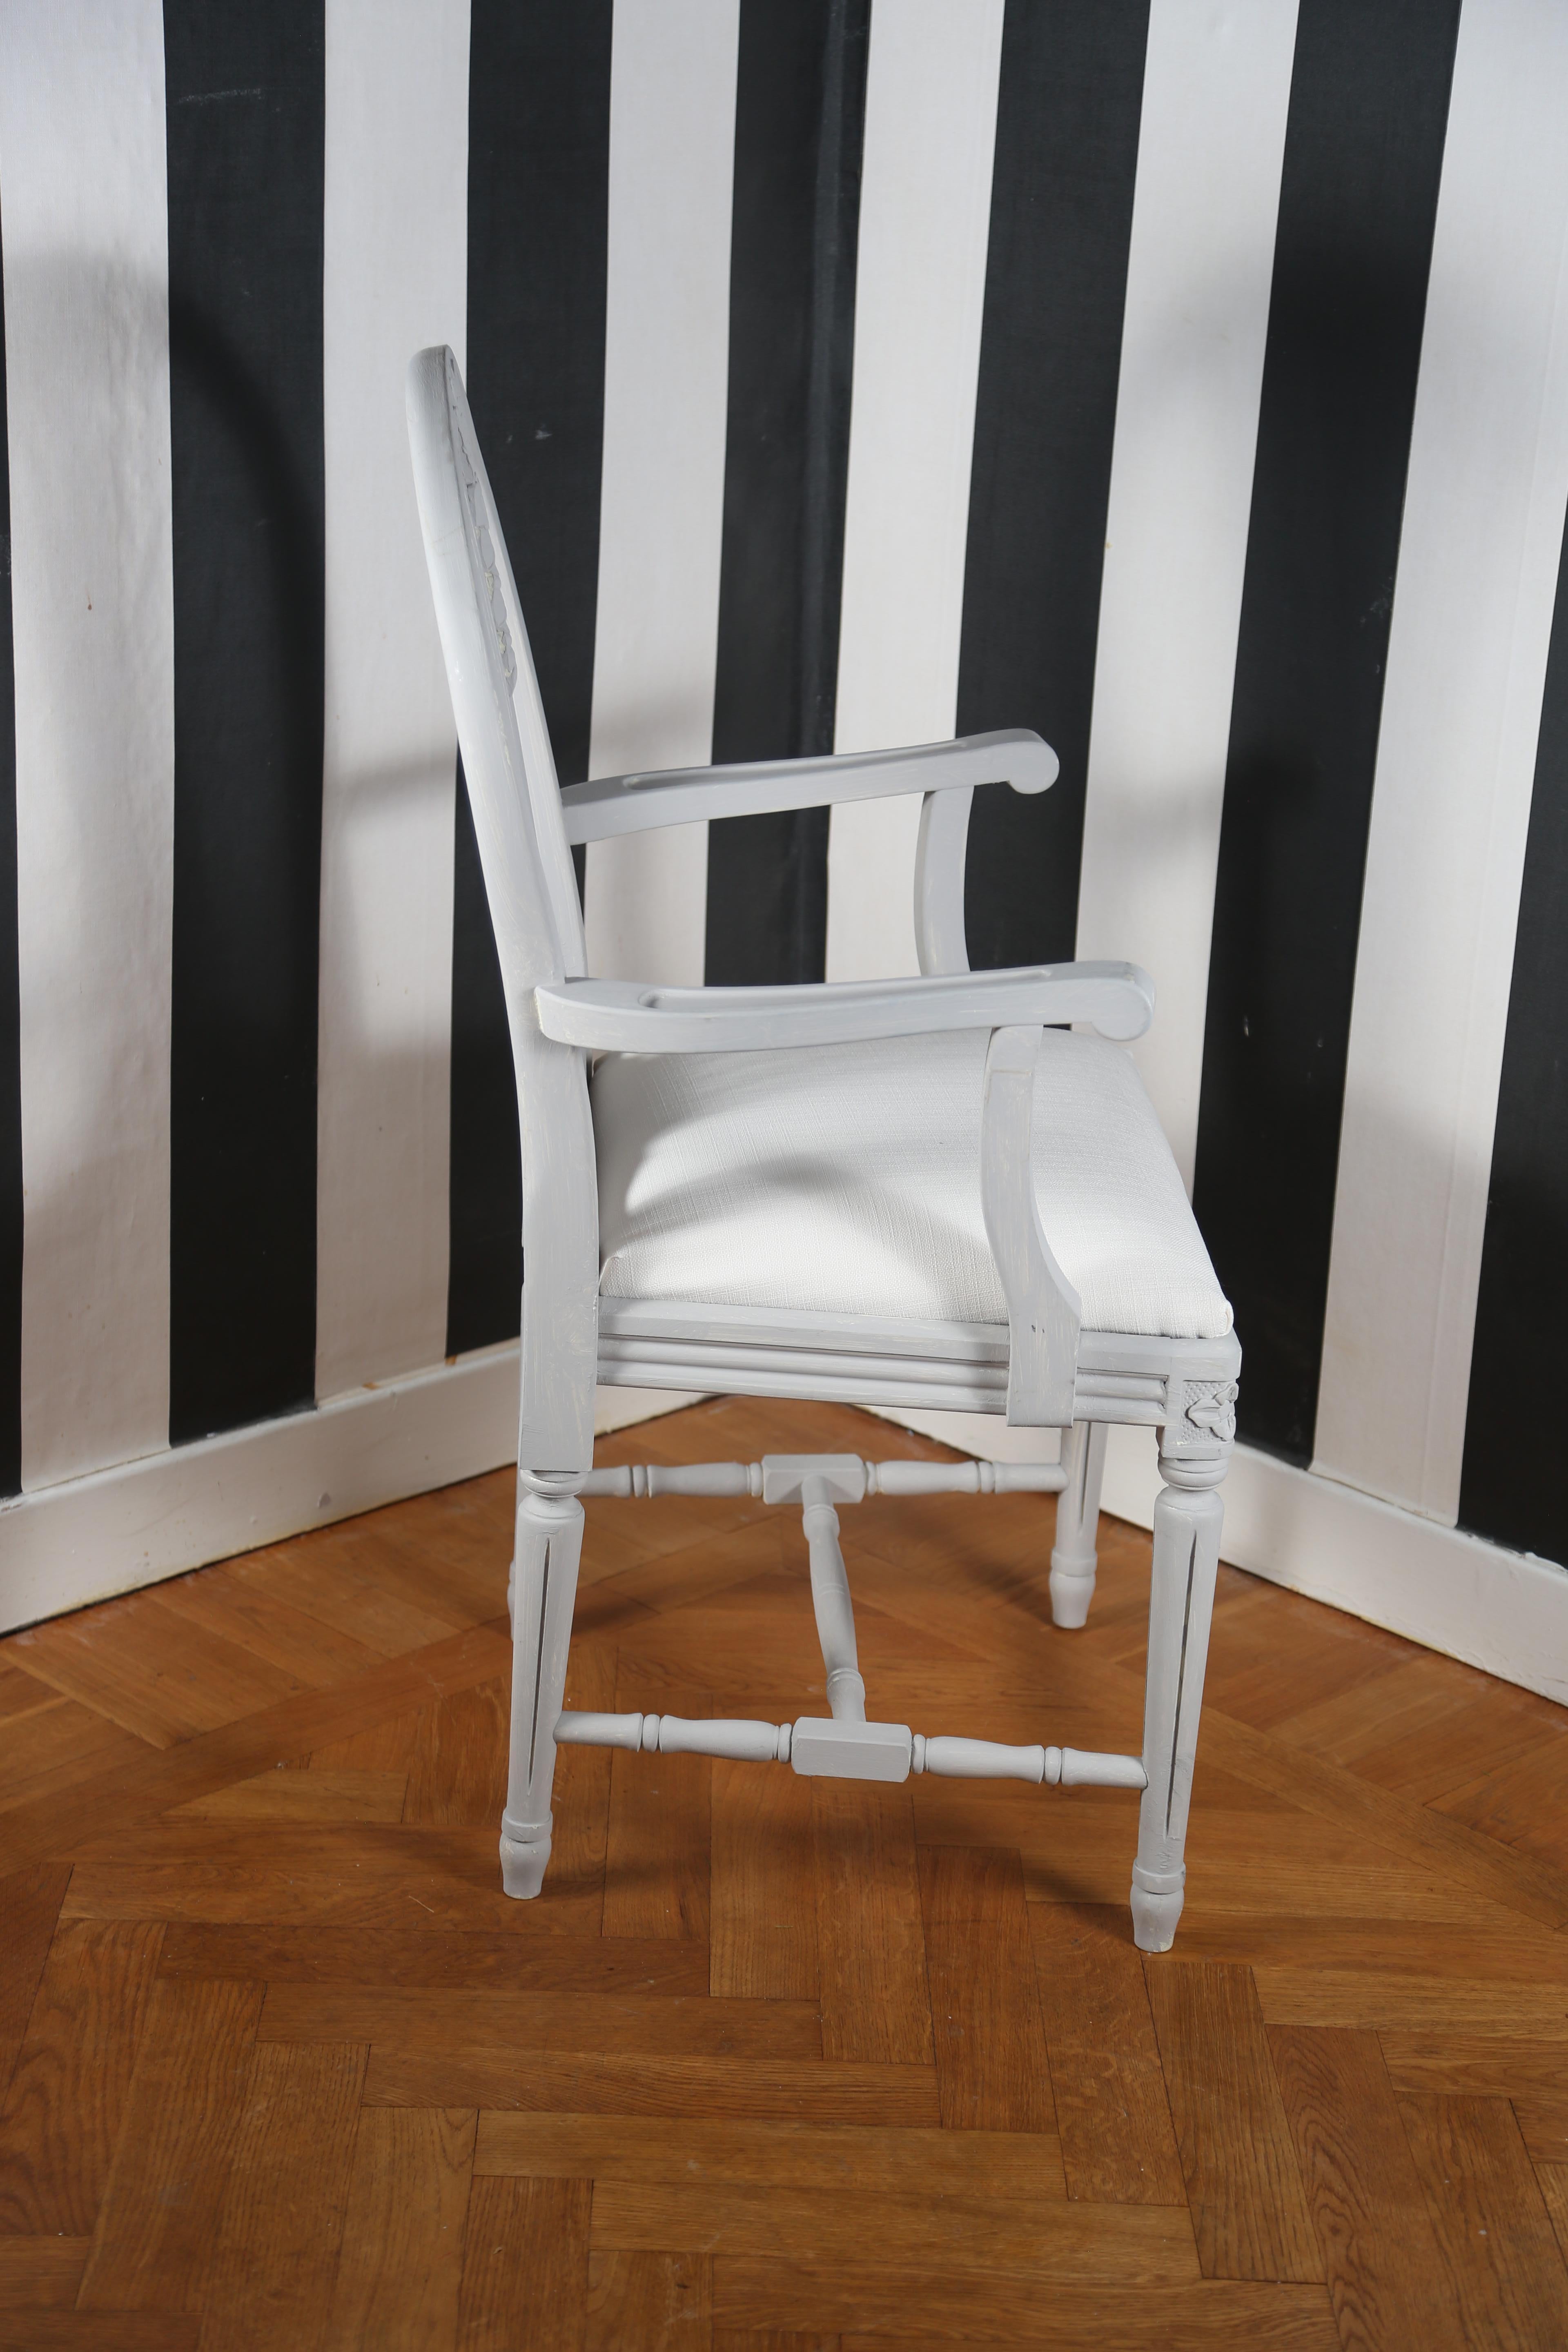 Swedish style painted armchair: the back has the weatsheaf details on it, the model is called Axet in Sweden, Rosettes top tapered fluted legs, bottom stretcher, painted in Swedish classical grey.

Measurements: H 95cm W51cm, 42cm L 41cm seat